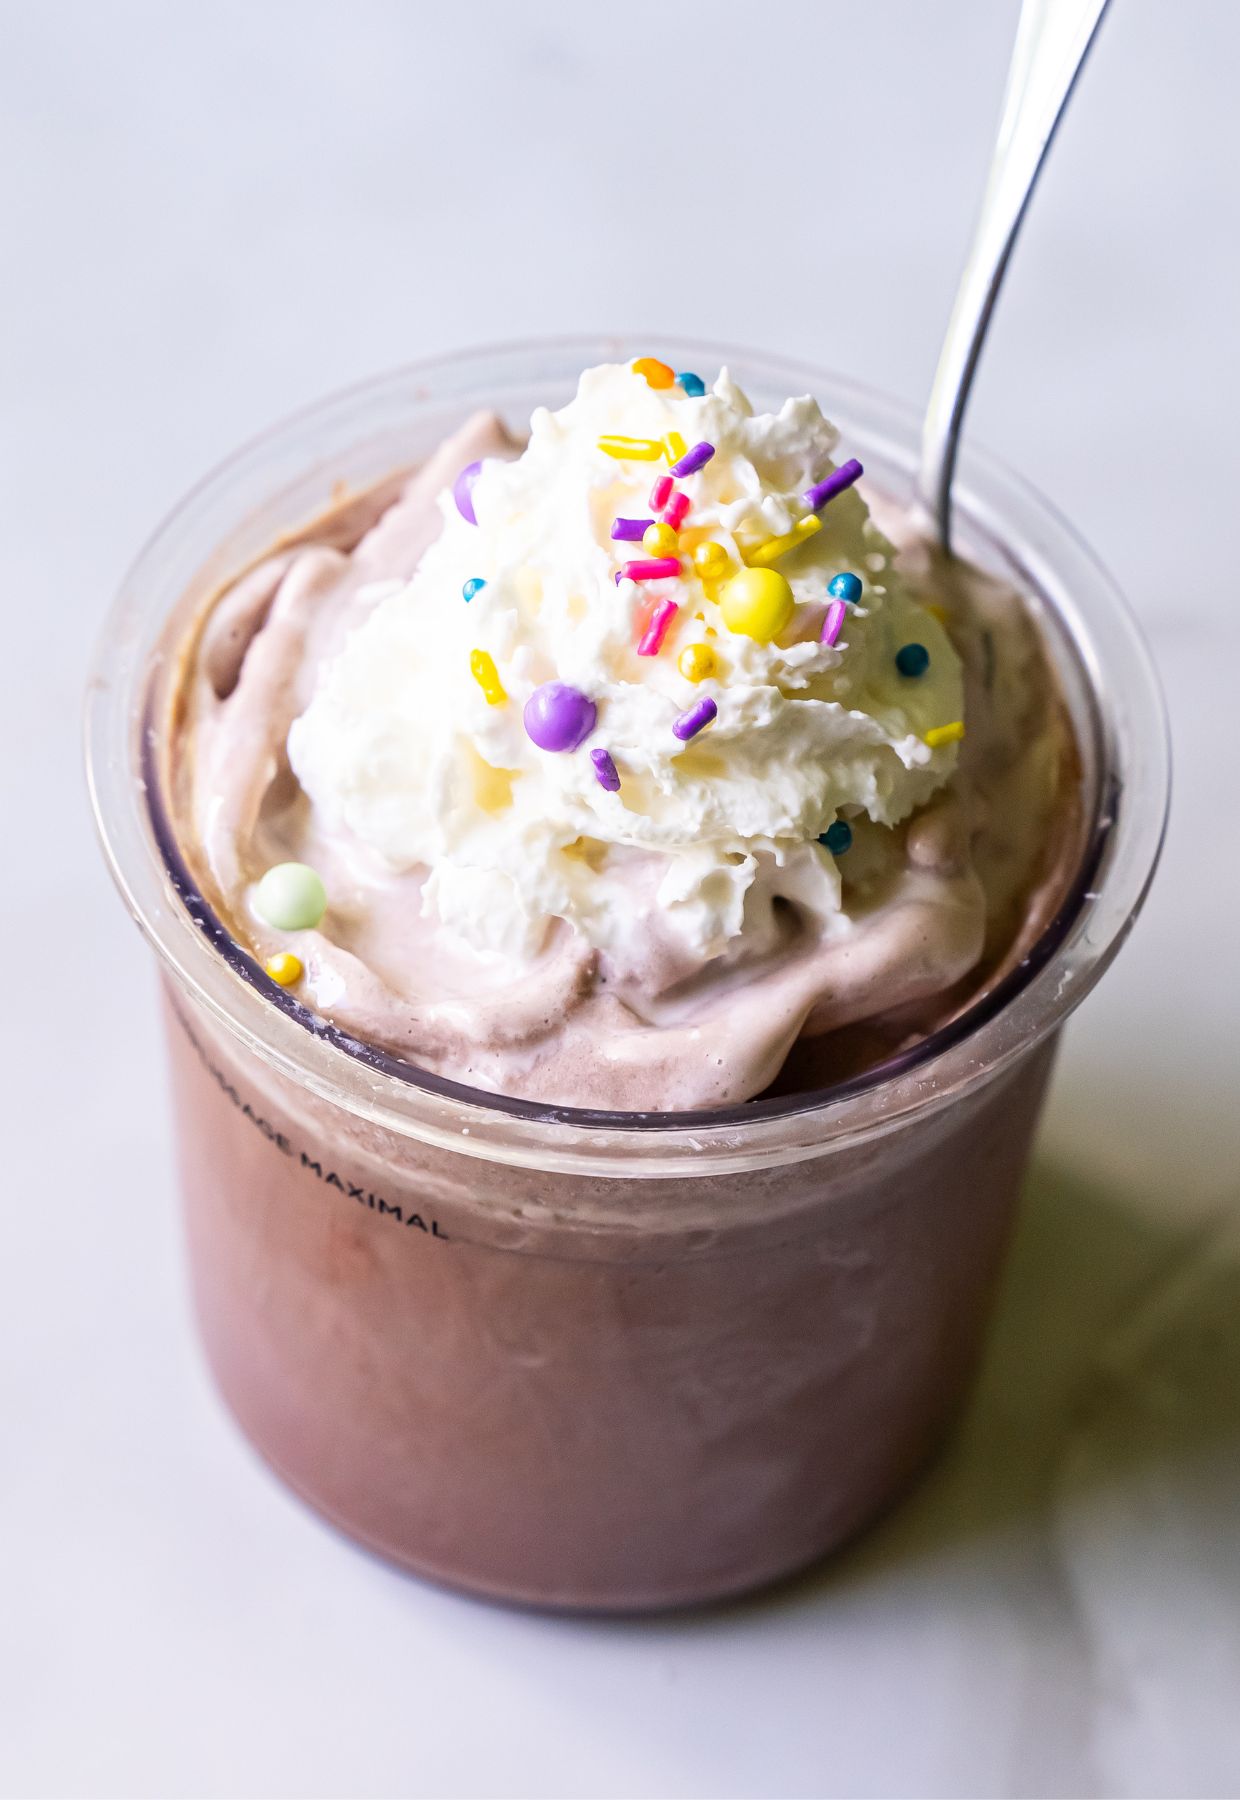 A cup of chocolate milkshake topped with whipped cream, colorful sprinkles, and a spoon inserted—a delightful treat inspired by Ninja Creami recipes.